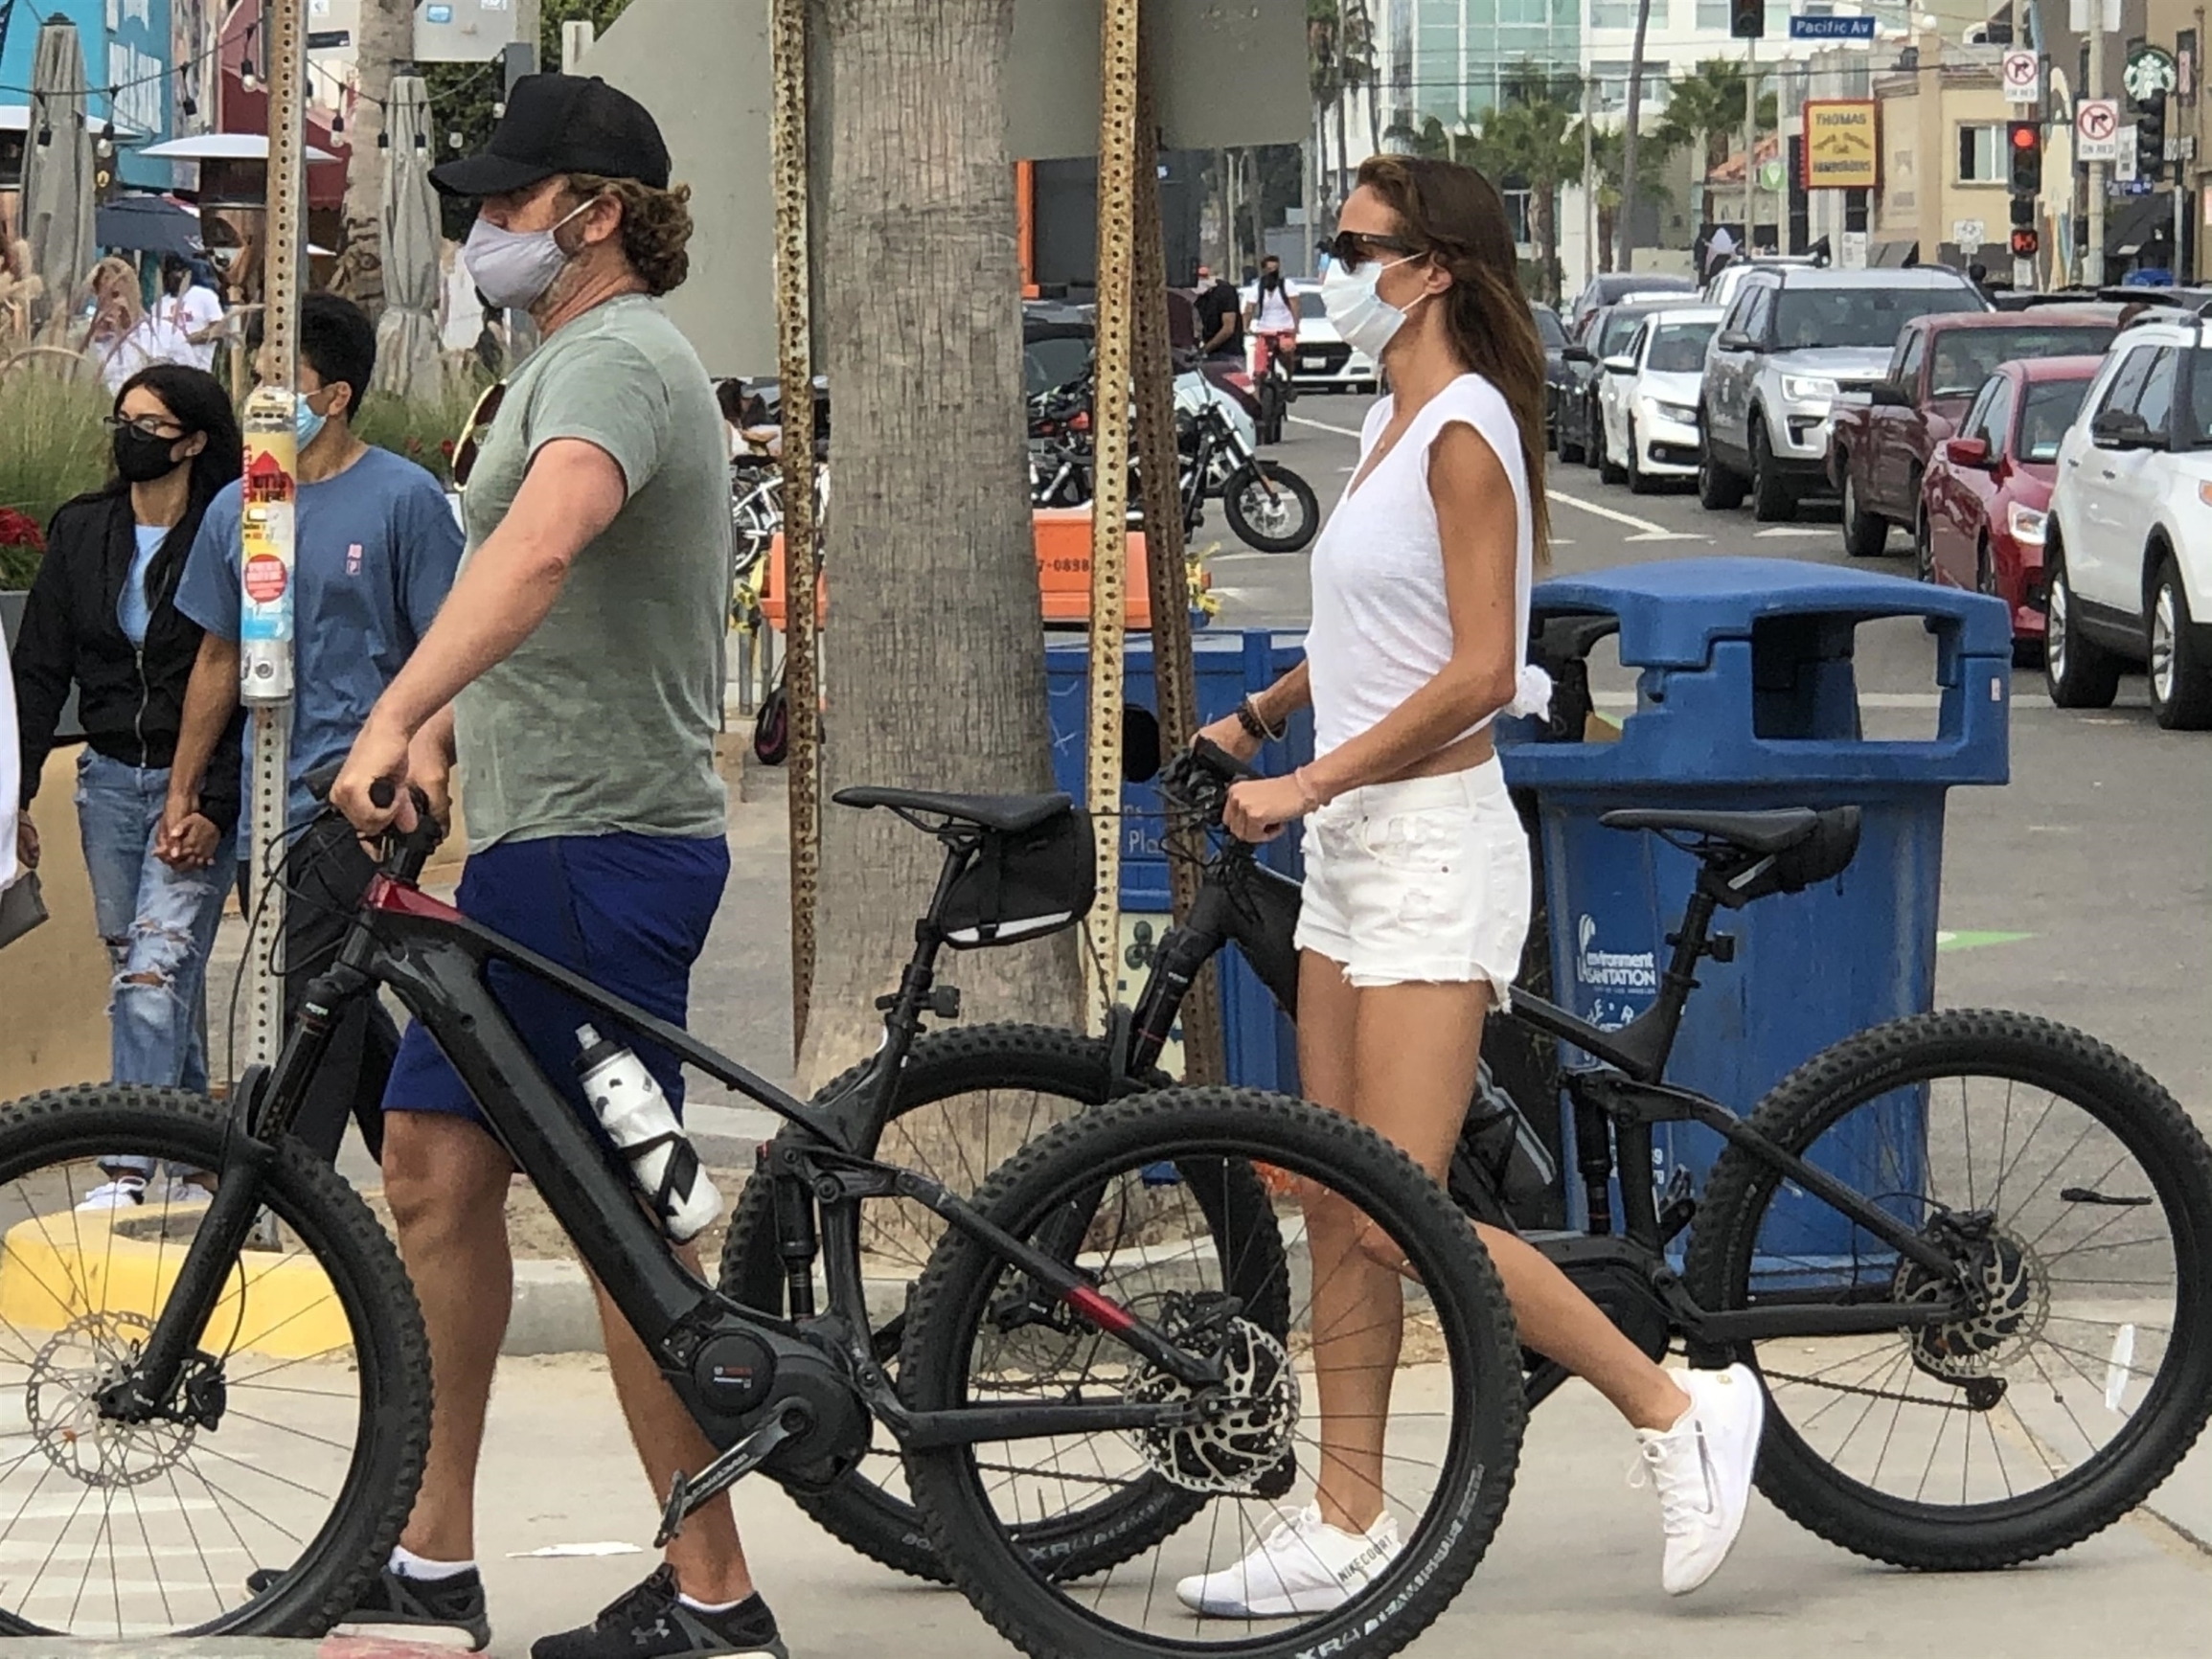 Venice Beach, CA  - *EXCLUSIVE*  - Gerard Butler and girlfriend Morgan Brown hop on their bikes for a ride after kicking back with friends at a smoothie bar in Venice Beach.

BACKGRID USA 3 AUGUST 2020,Image: 549662102, License: Rights-managed, Restrictions: , Model Release: no, Credit line: Lastarpix / BACKGRID / Backgrid USA / Profimedia